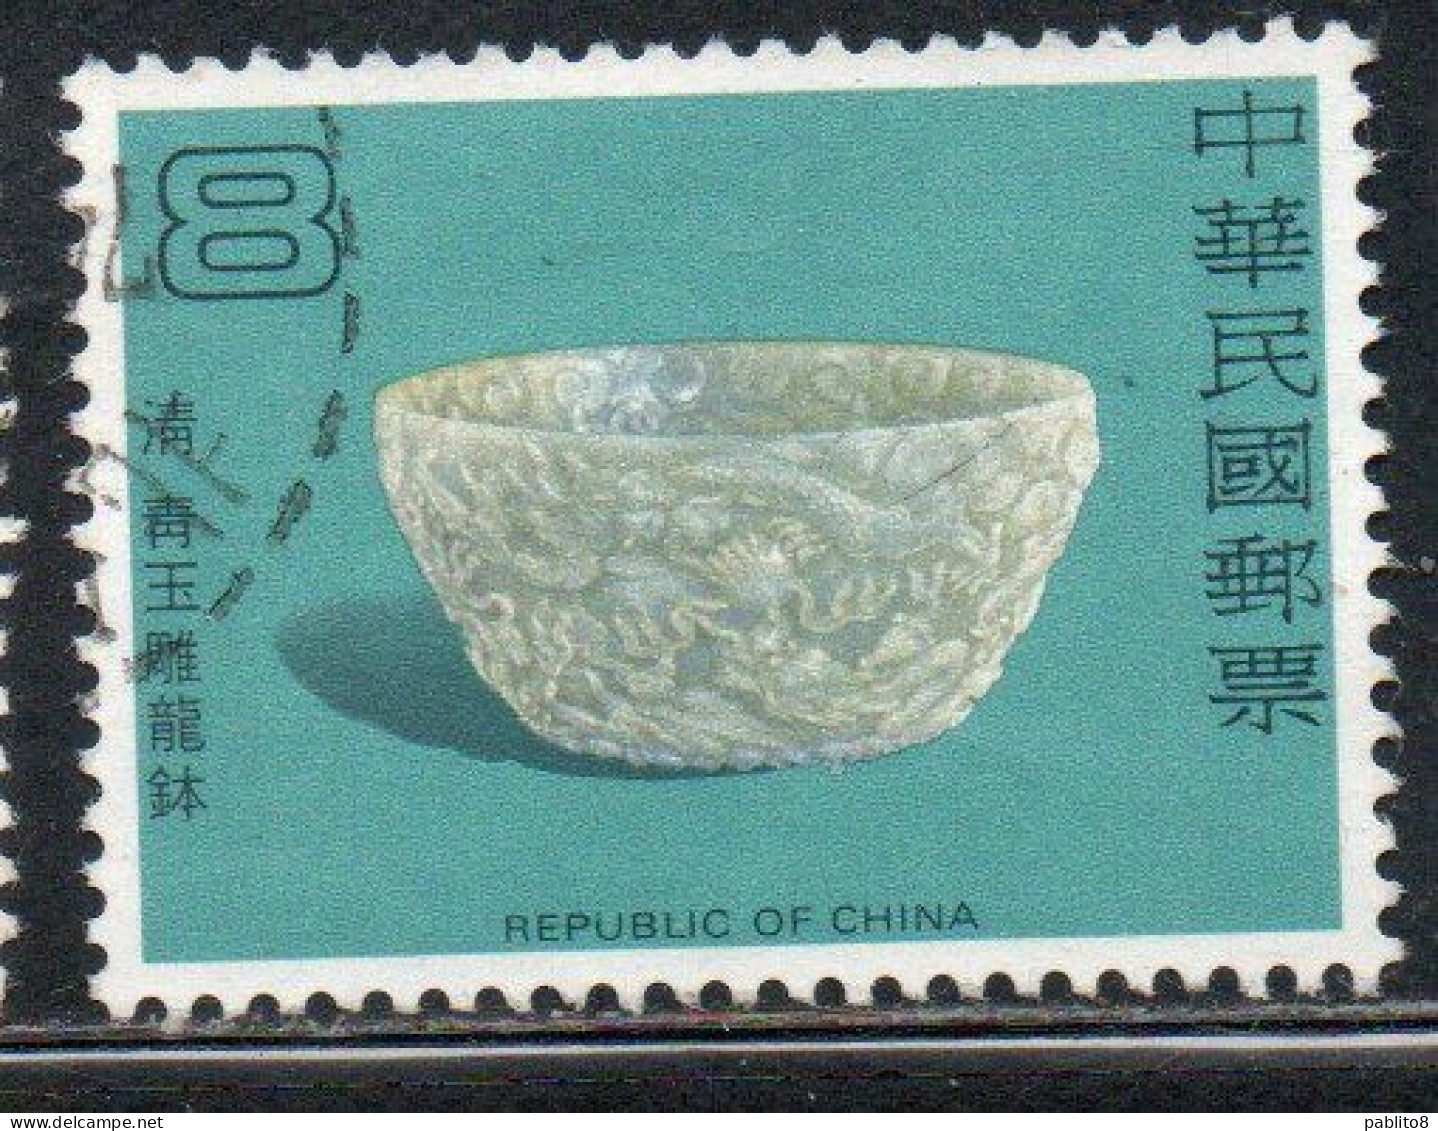 CHINA REPUBLIC CINA TAIWAN FORMOSA 1980 JADE POTTERY MONK'S ALMS BOWL CH'ING DYNASTY 8$ USED USATO OBLITERE' - Gebraucht